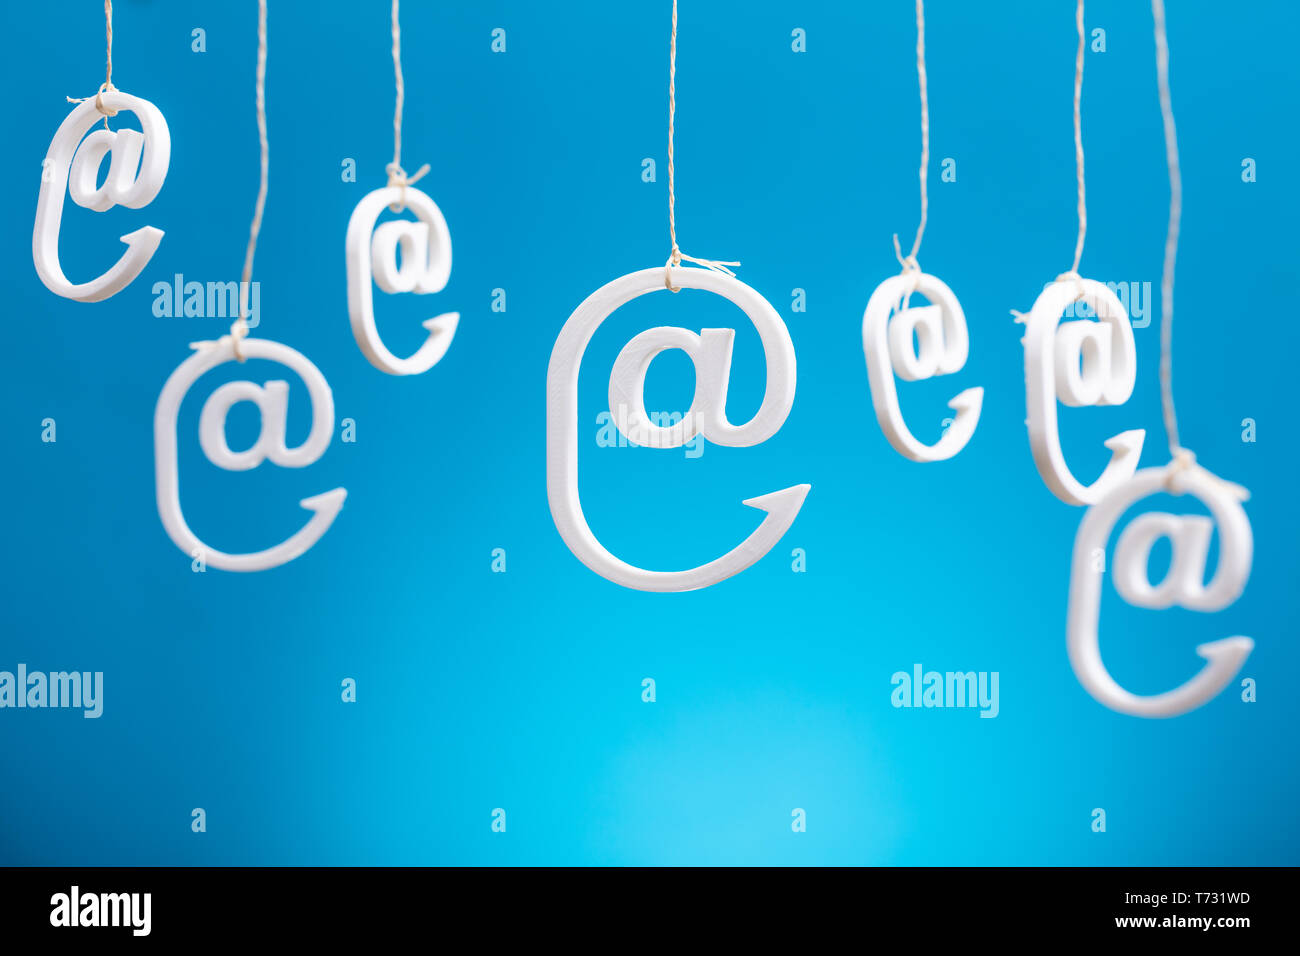 Email Icons Hanging By Strings Against Blue Backdrop Stock Photo